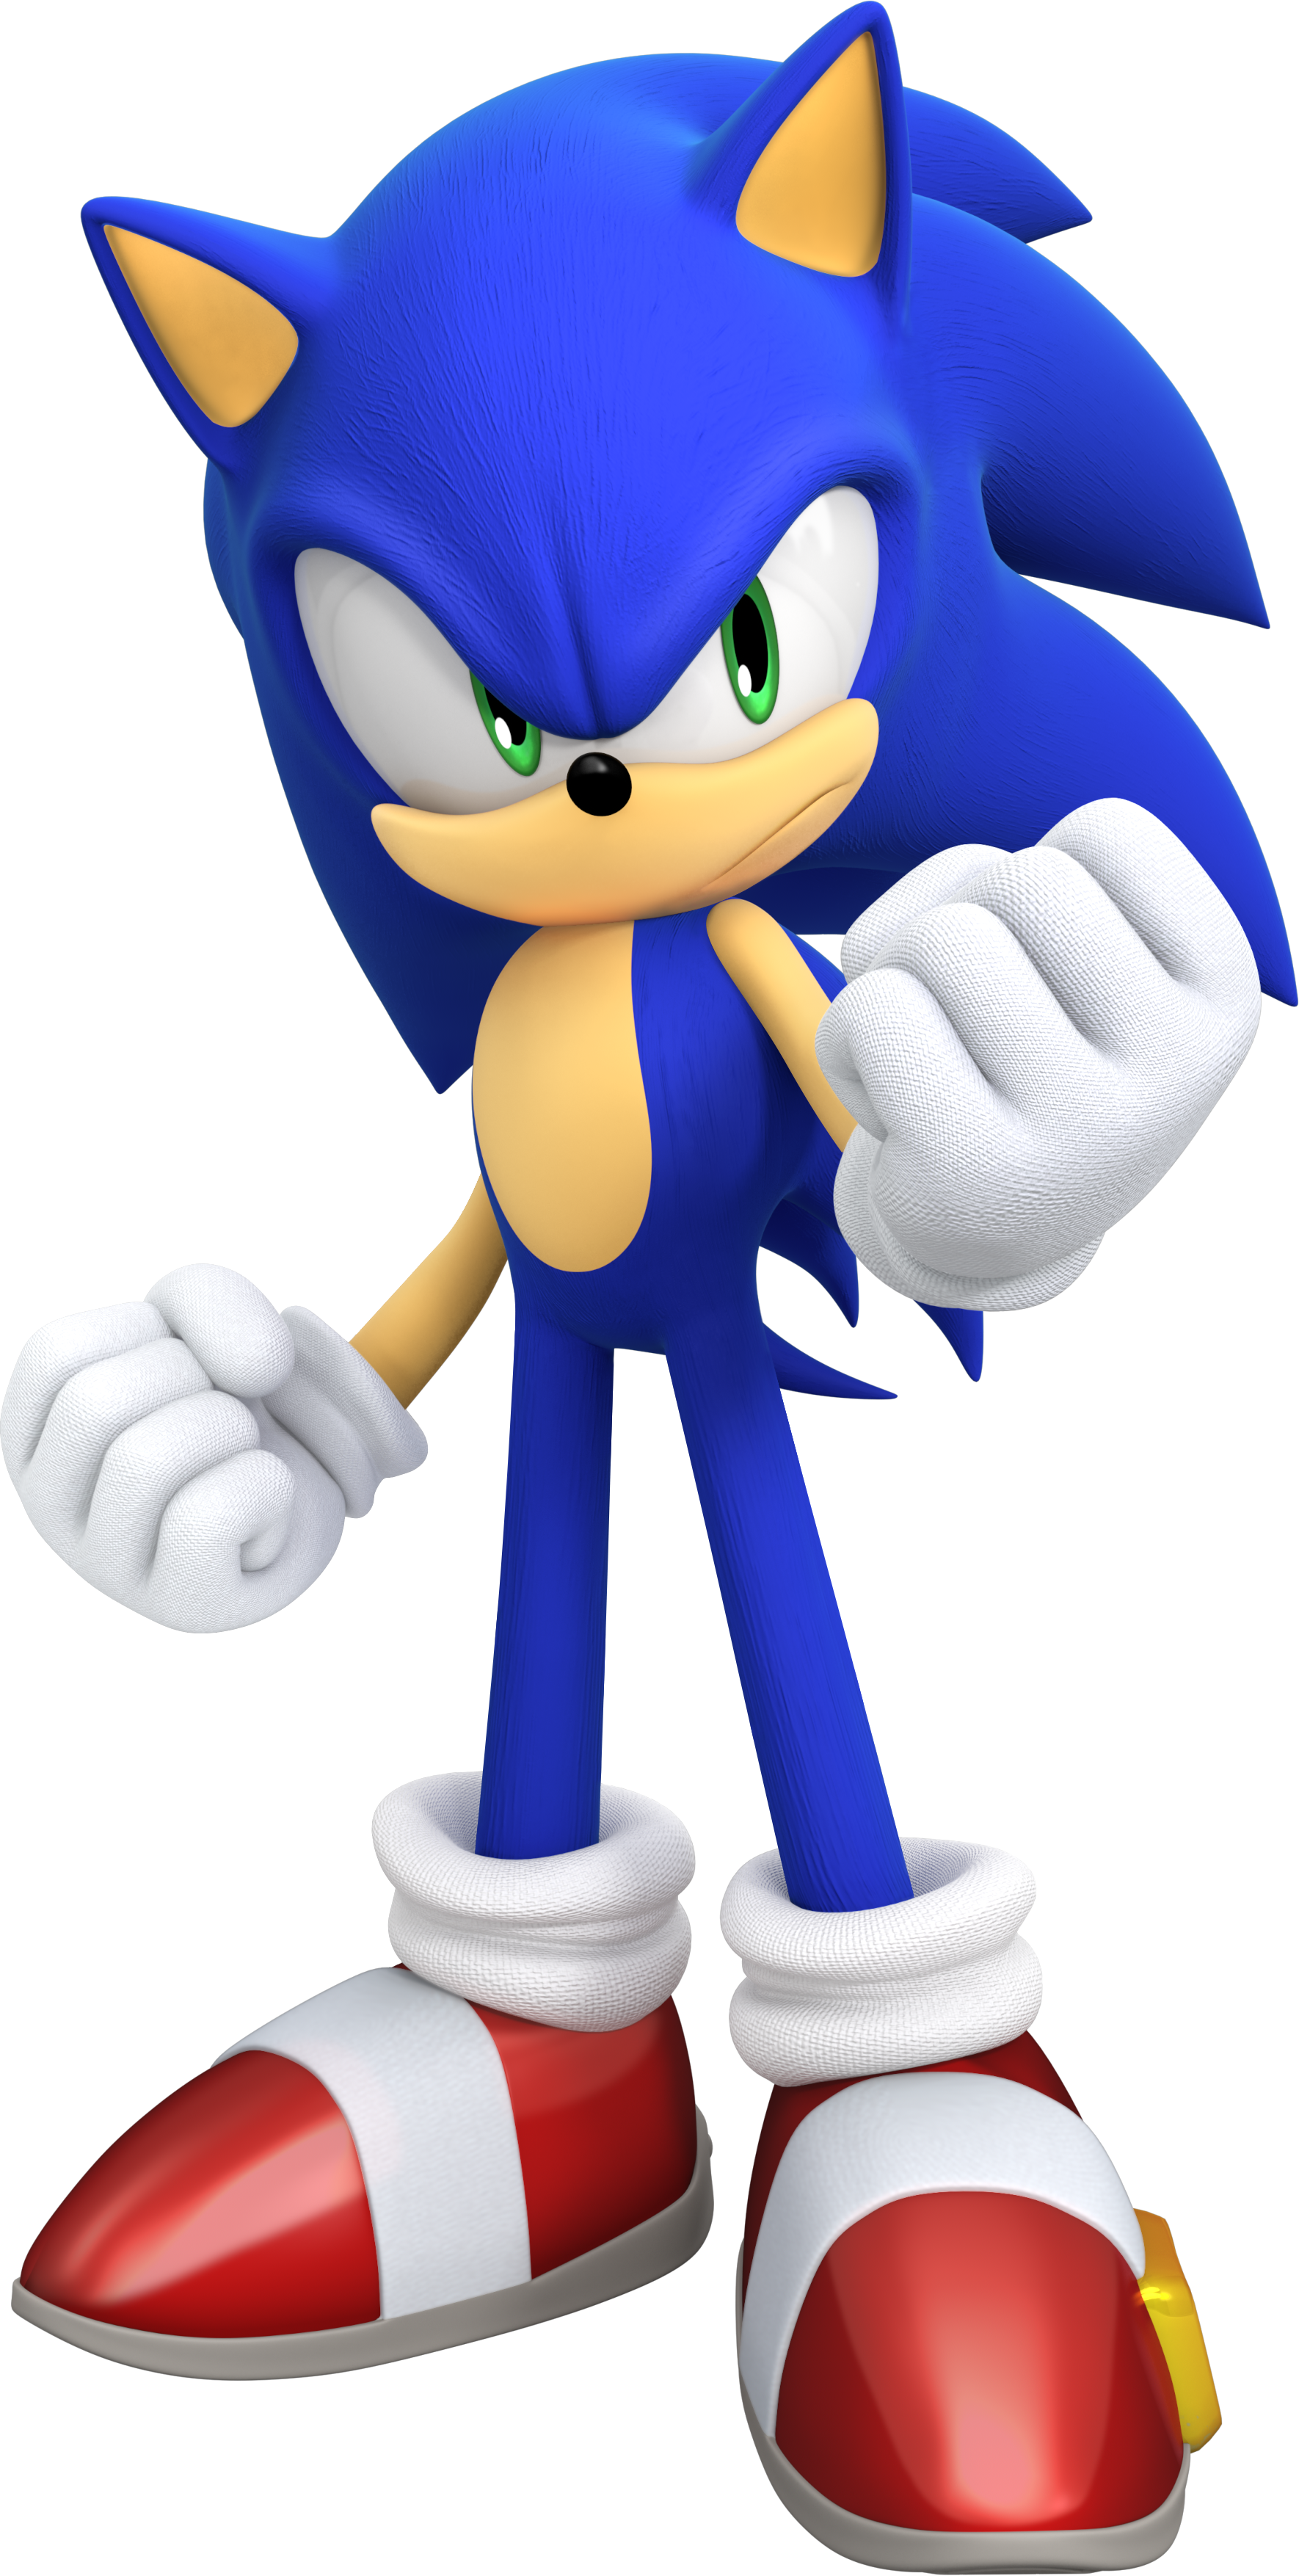 Imagens do sonic png